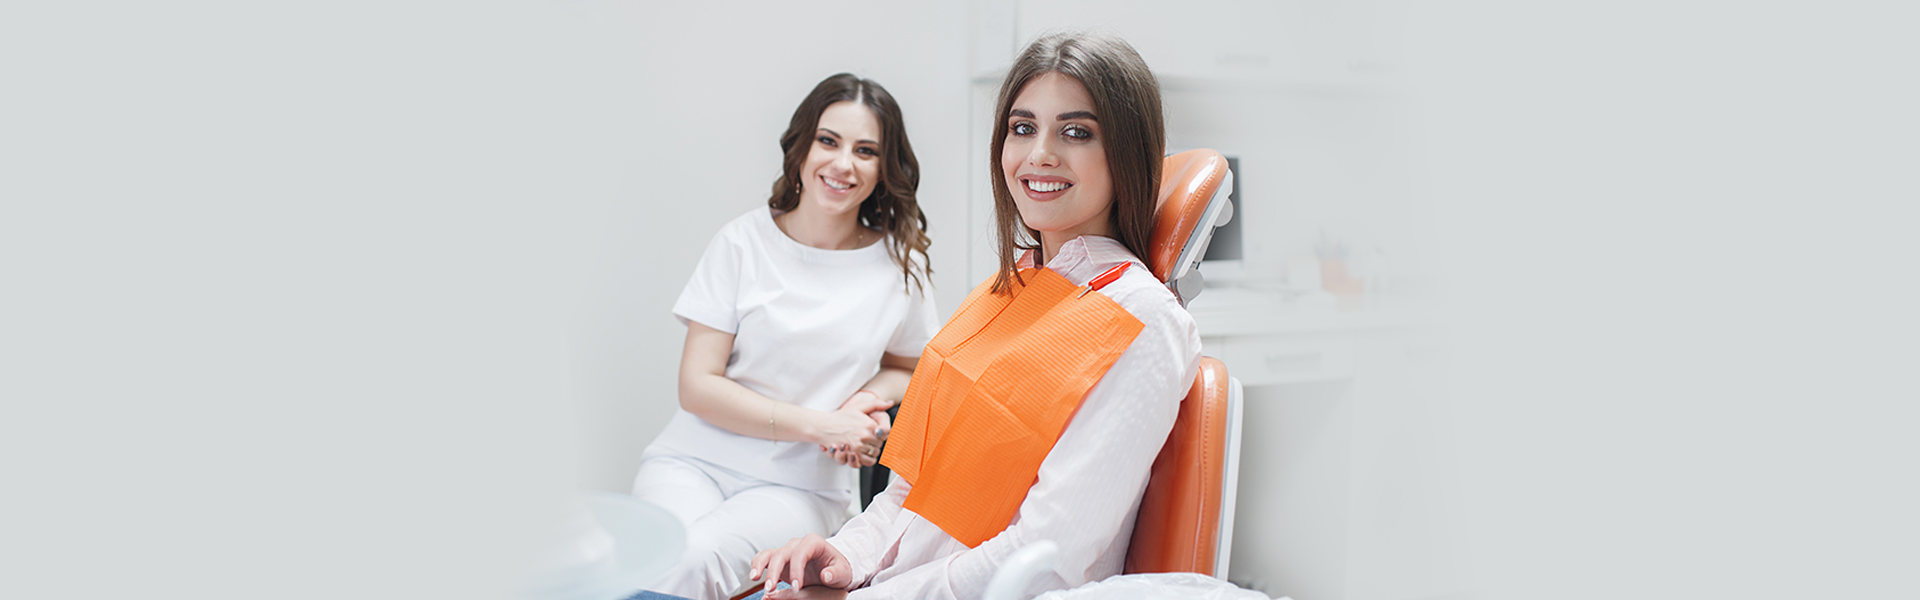 7 Frequently Asked Questions about Dental Exams & Cleaning